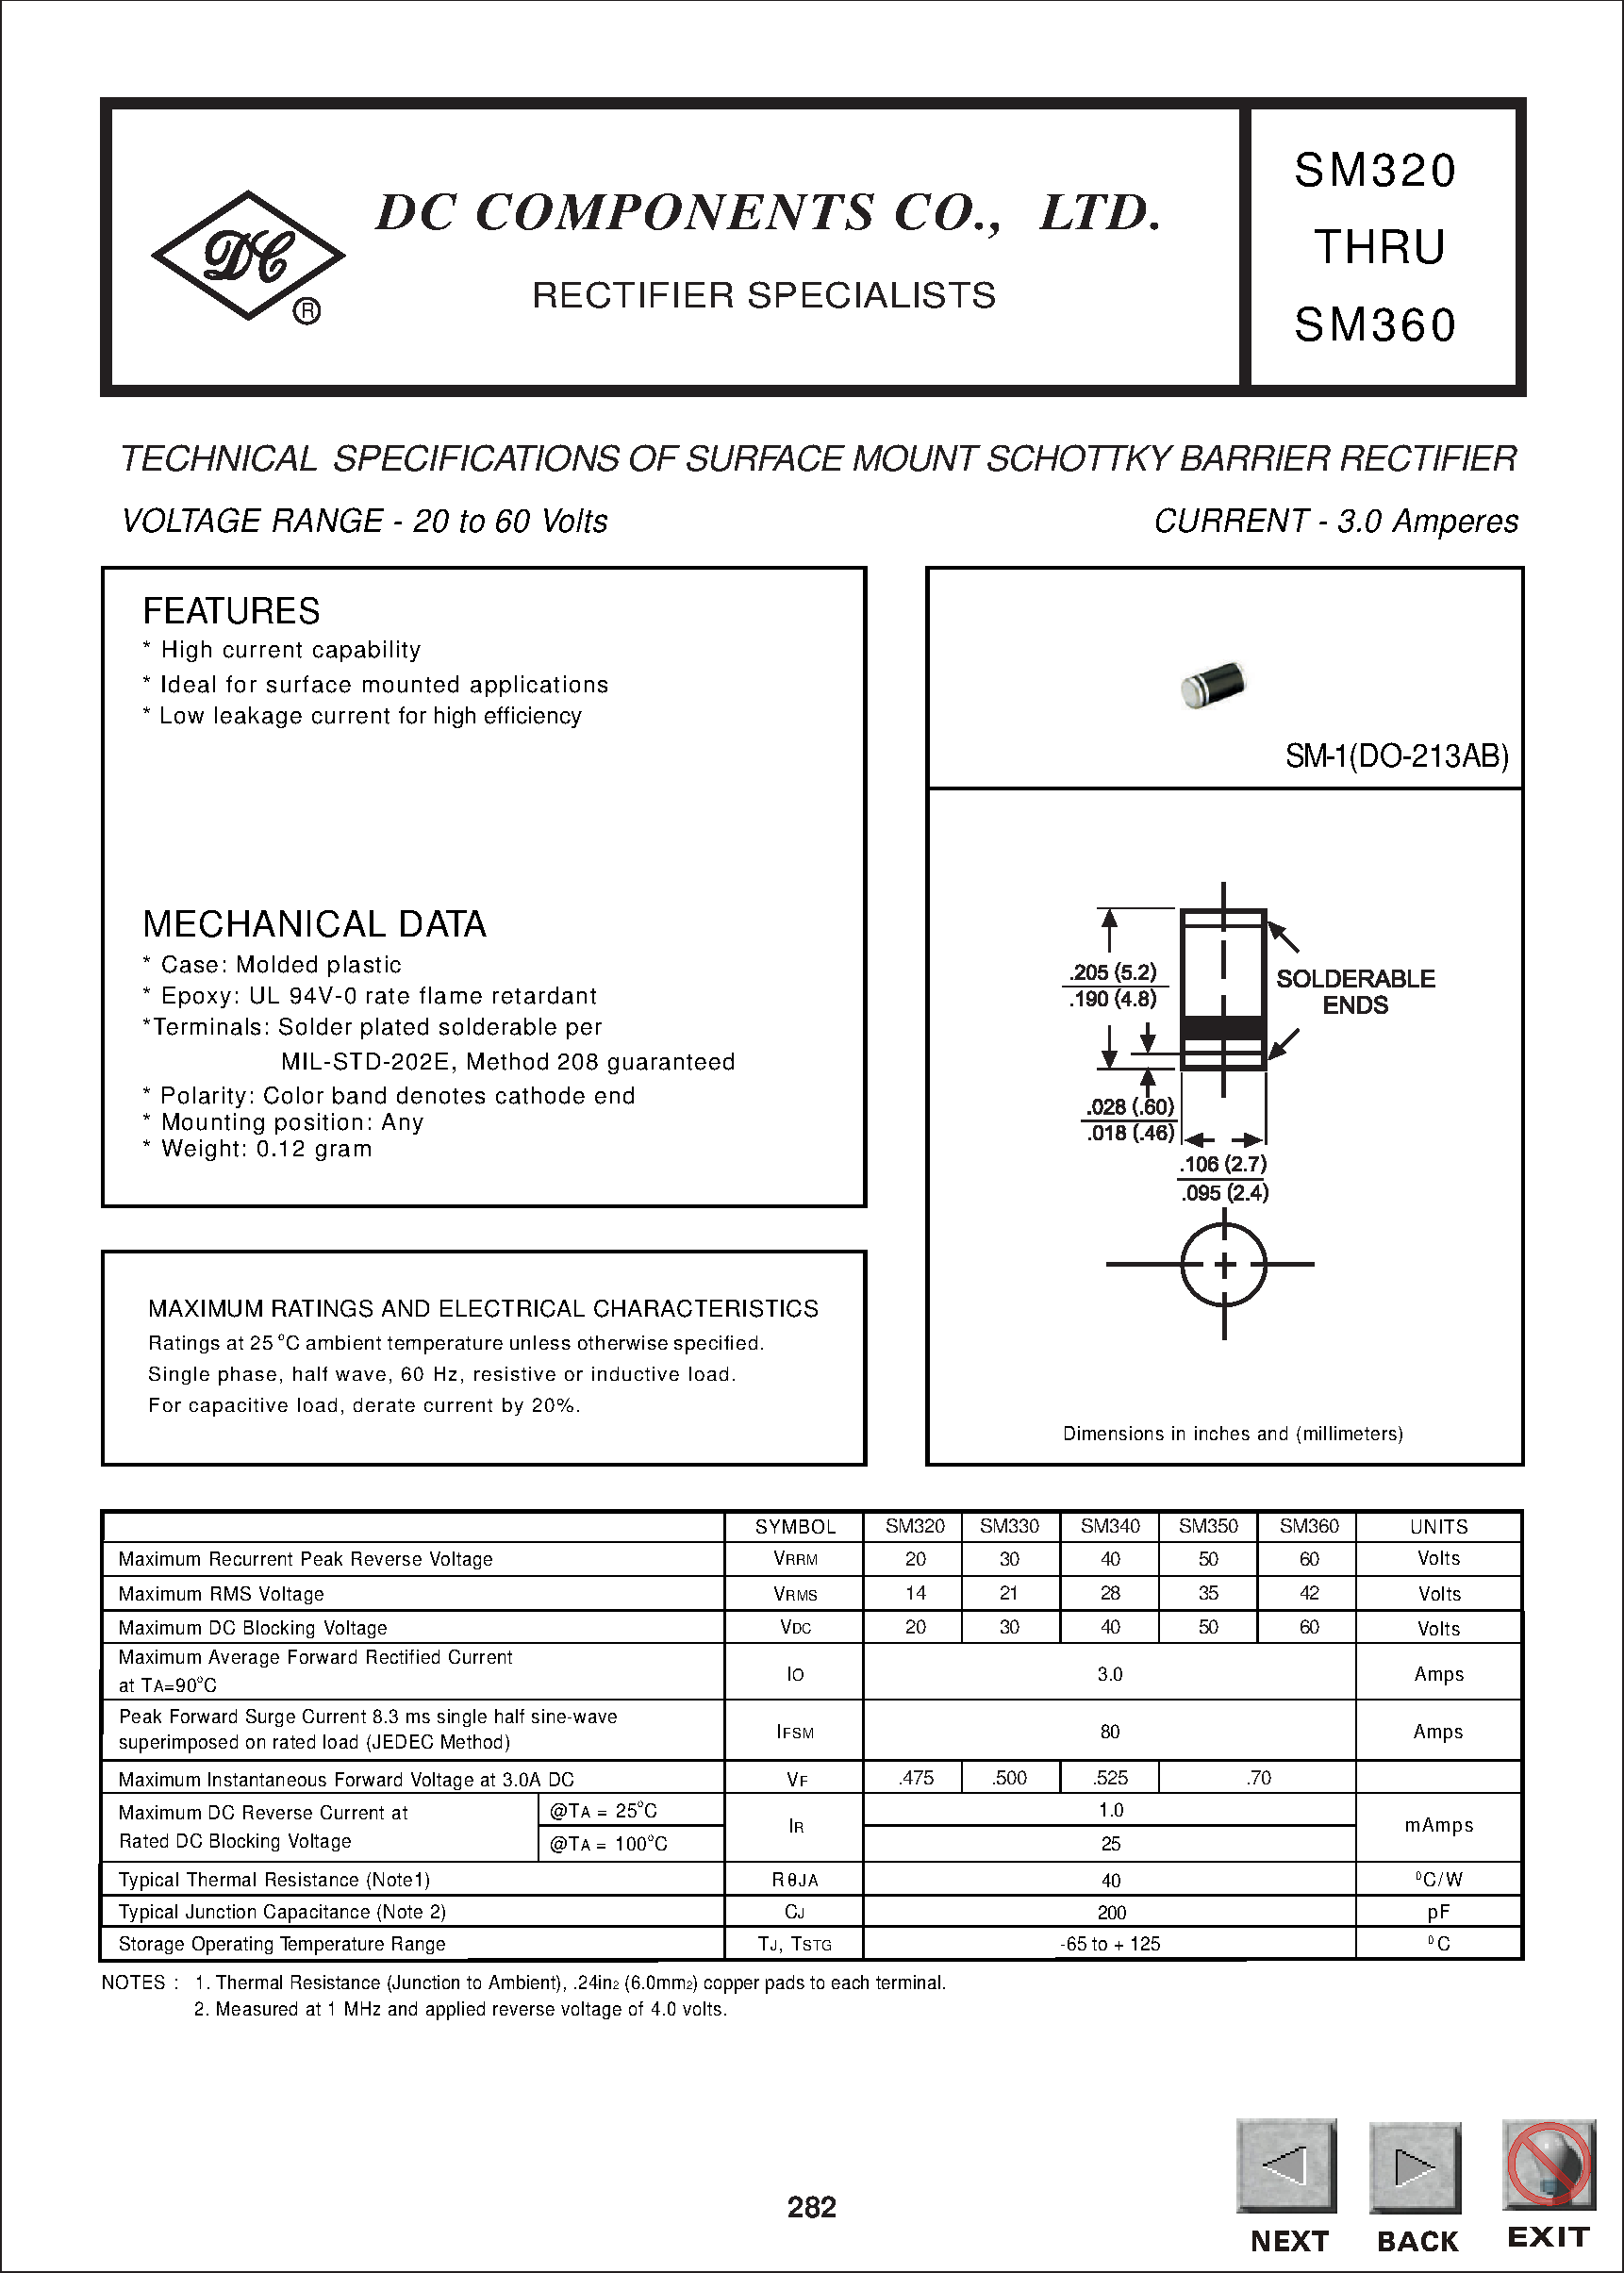 Даташит SM360 - TECHNICAL SPECIFICATIONS OF SURFACE MOUNT SCHOTTKY BARRIER RECTIFIER страница 1